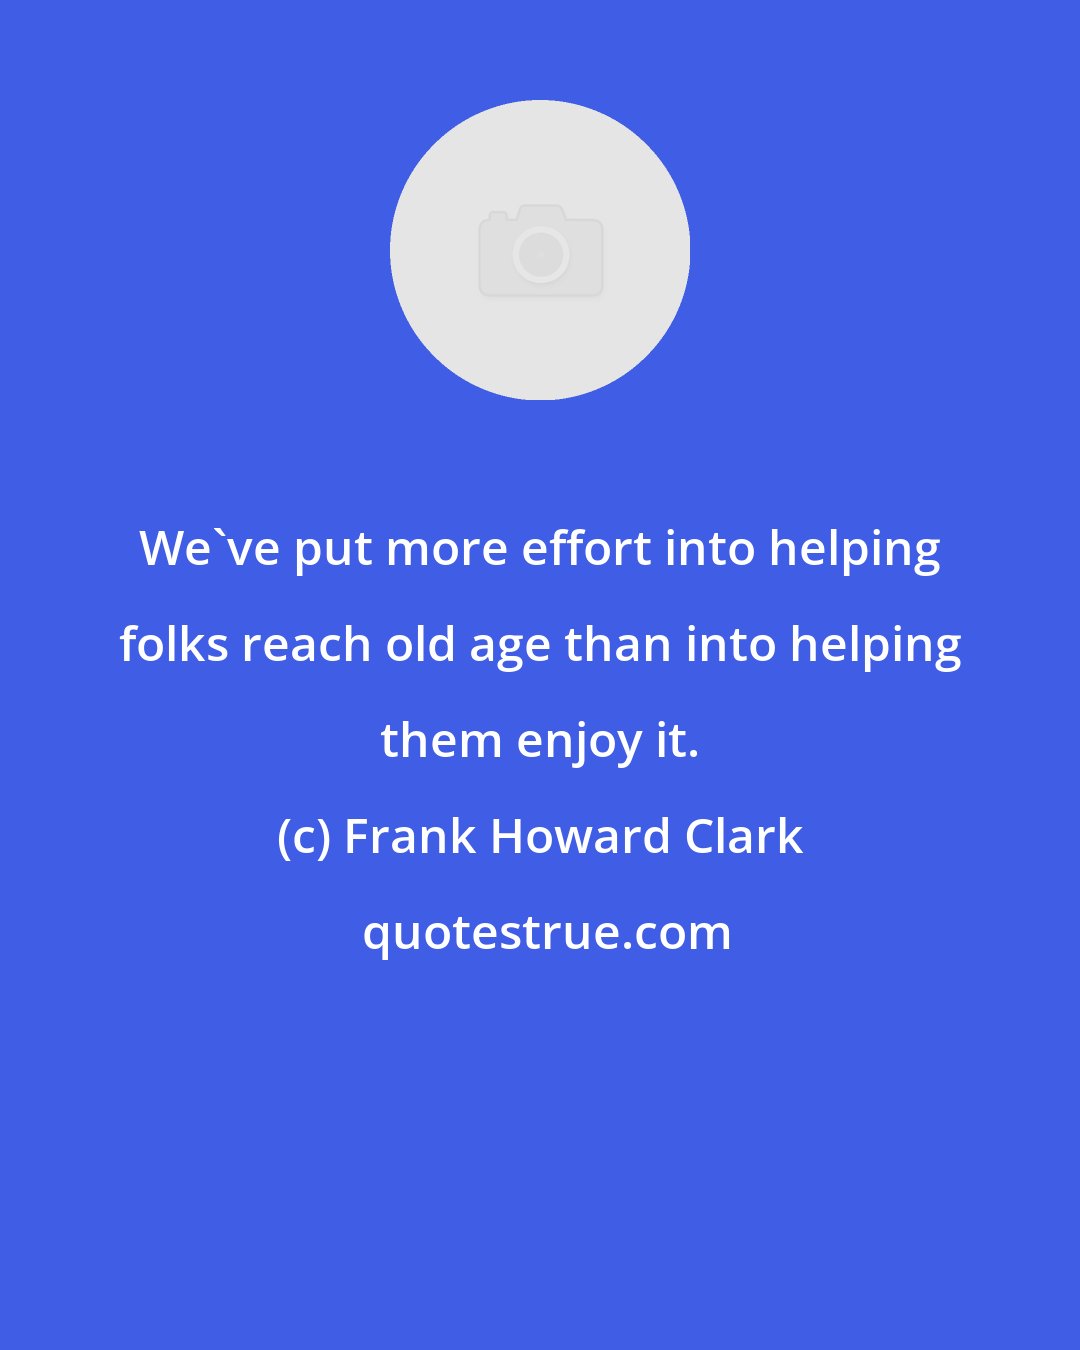 Frank Howard Clark: We've put more effort into helping folks reach old age than into helping them enjoy it.